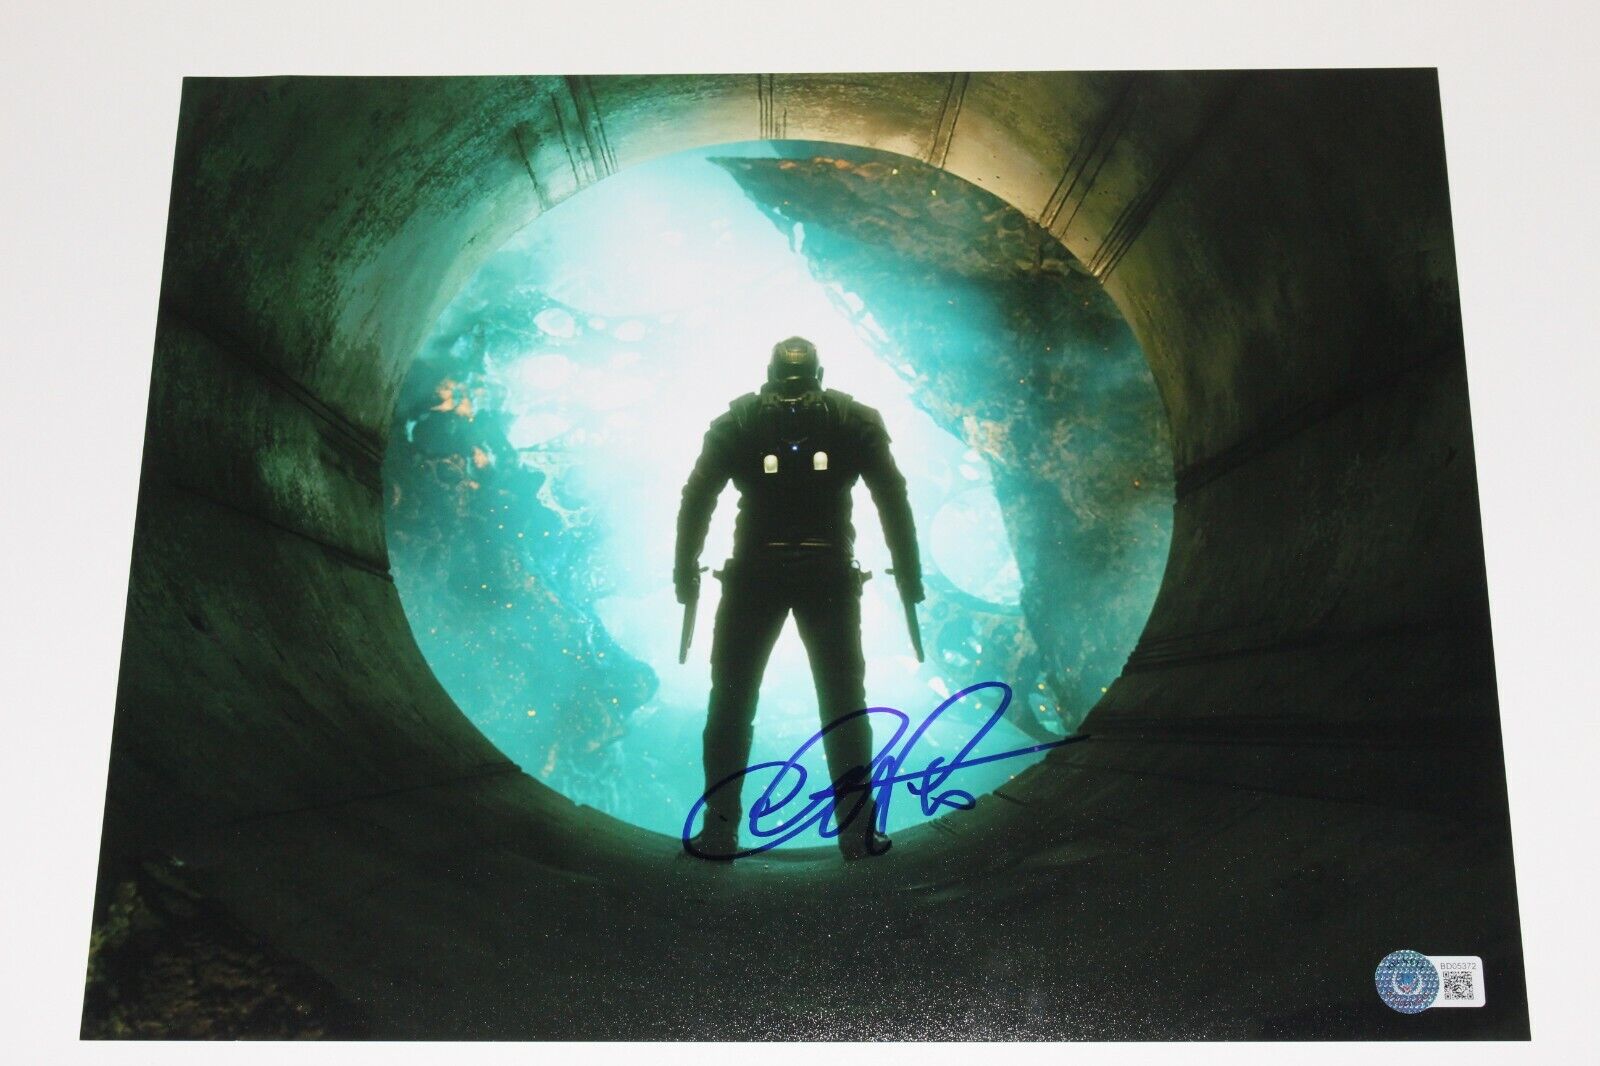 CHRIS PRATT SIGNED GUARDIANS OF THE GALAXY 11x14 MOVIE Photo Poster painting 1 STAR-LORD BECKETT